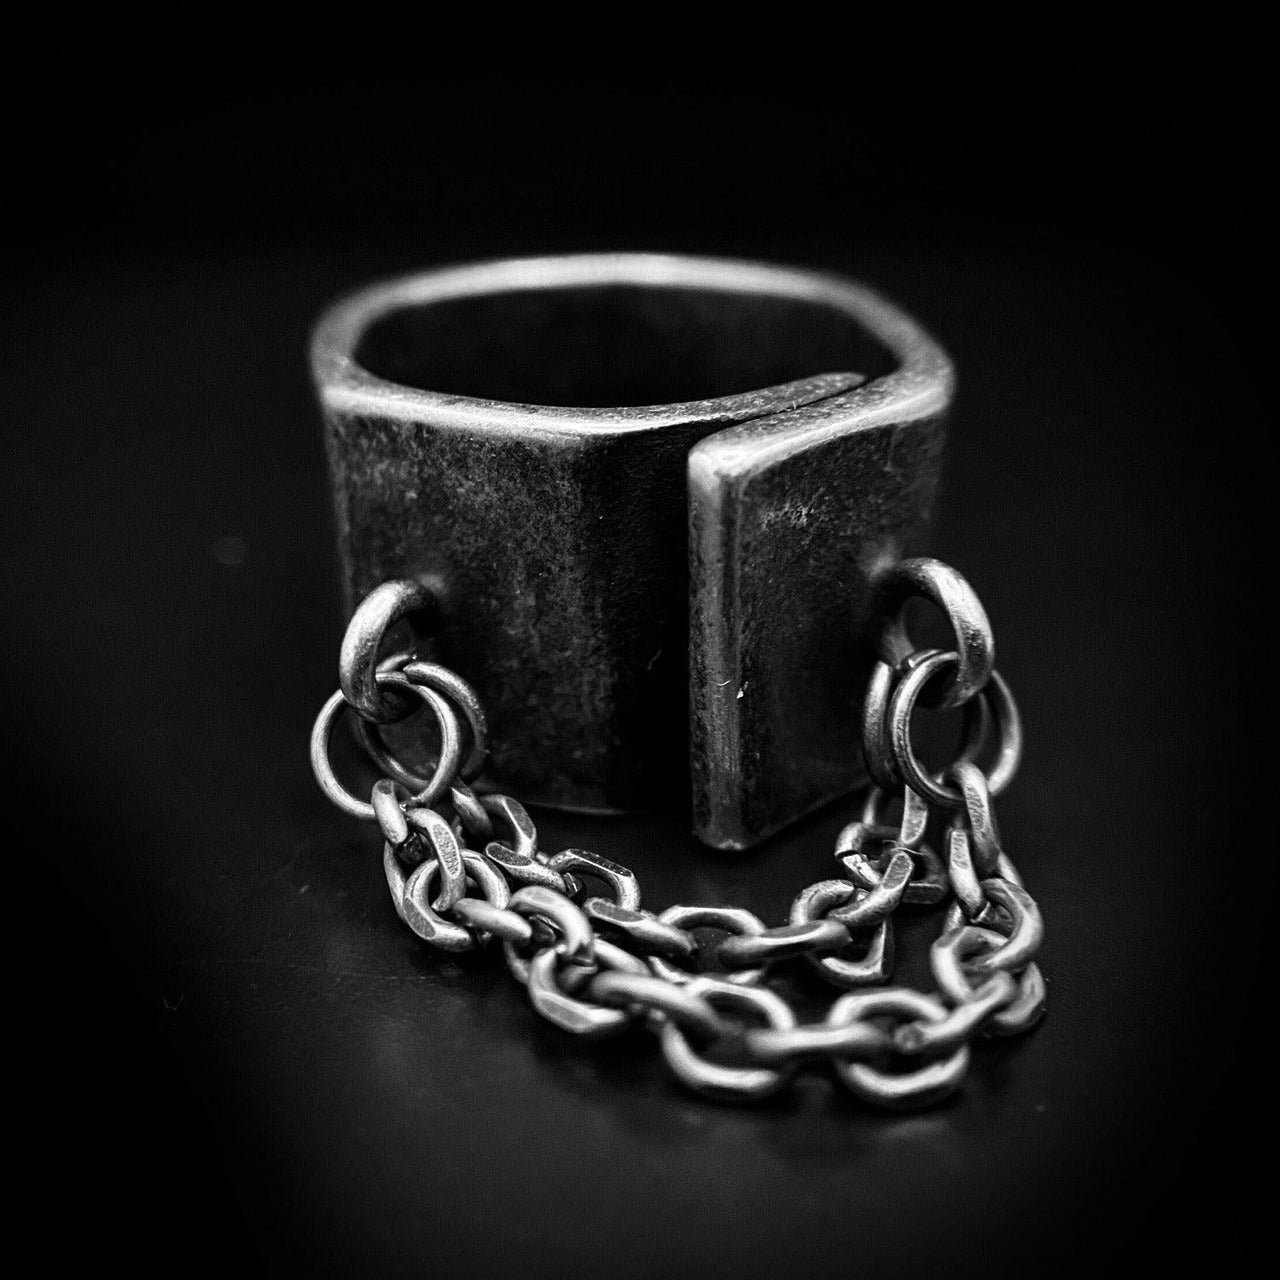 Stainless Steel Industrial Chain Ring - Black Feather Design